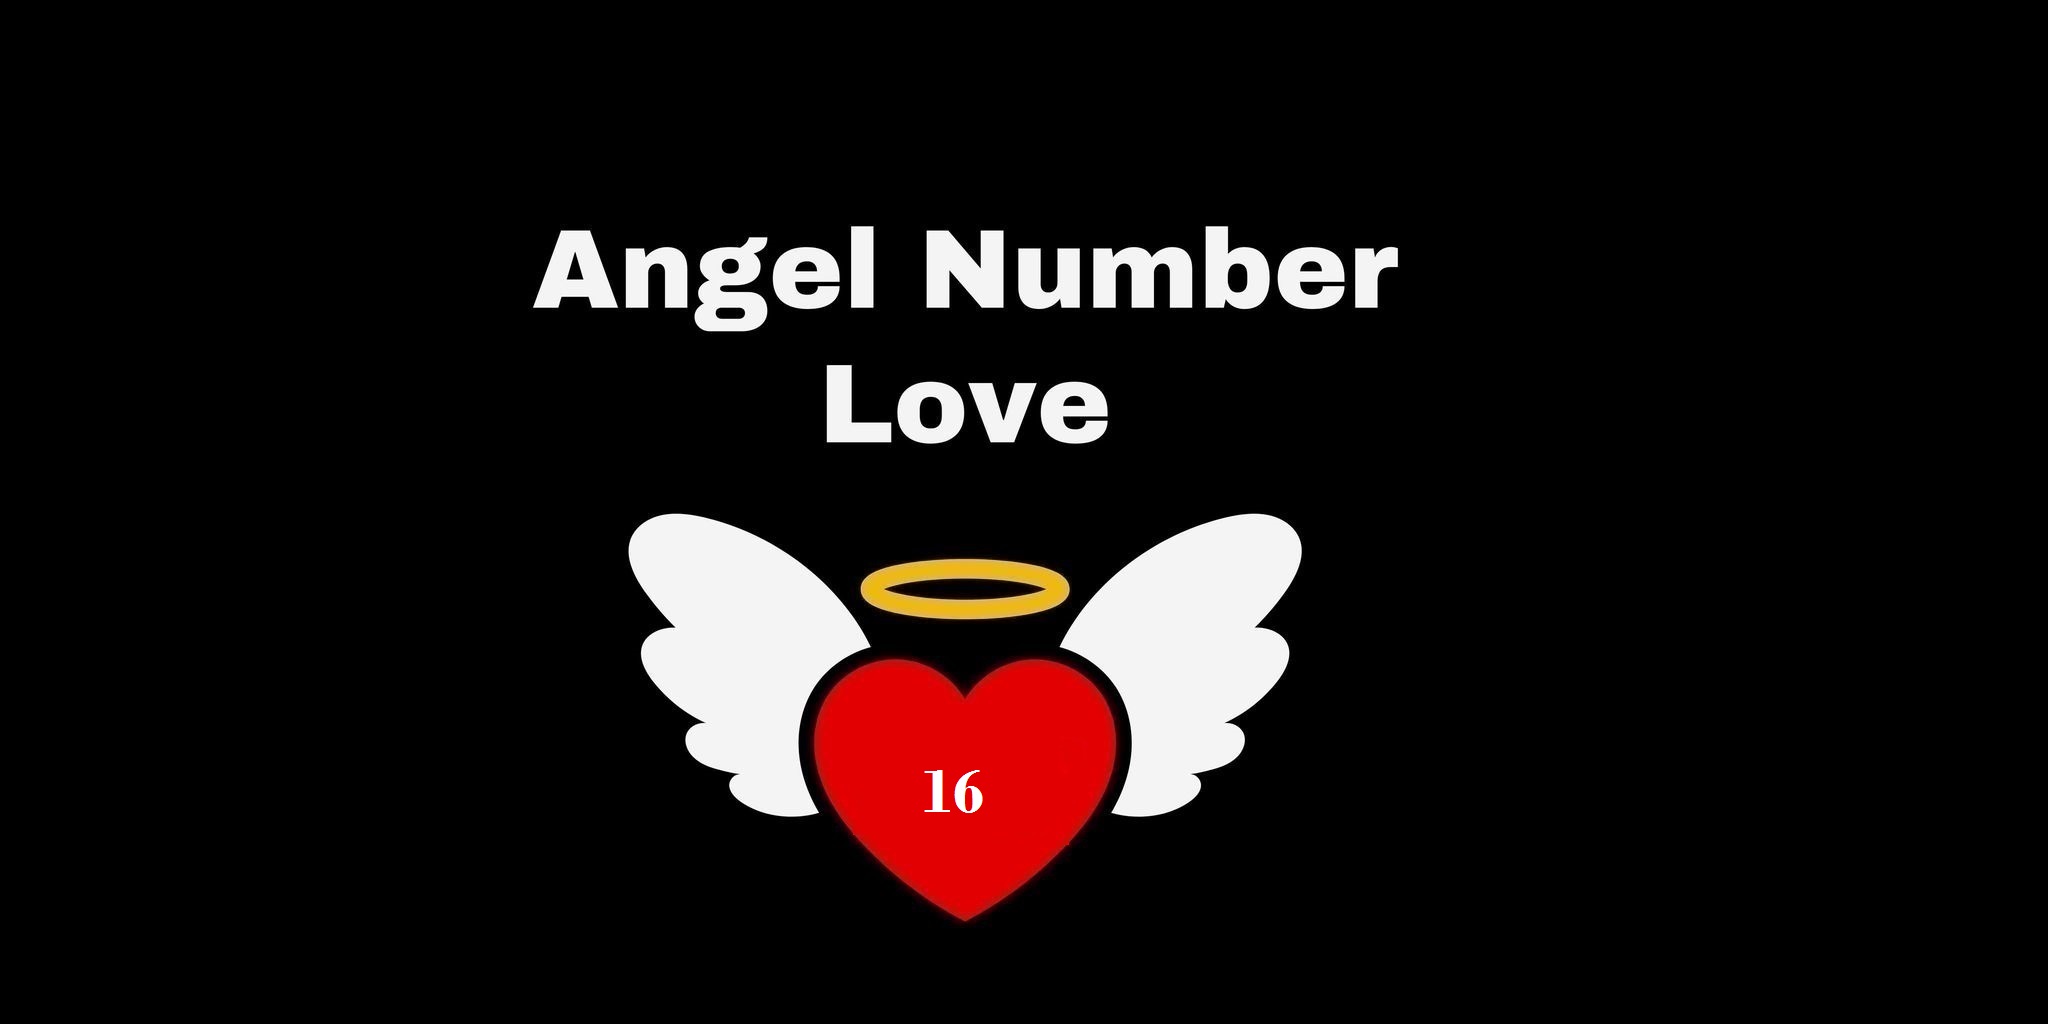 16 Angel Number Meaning In Love